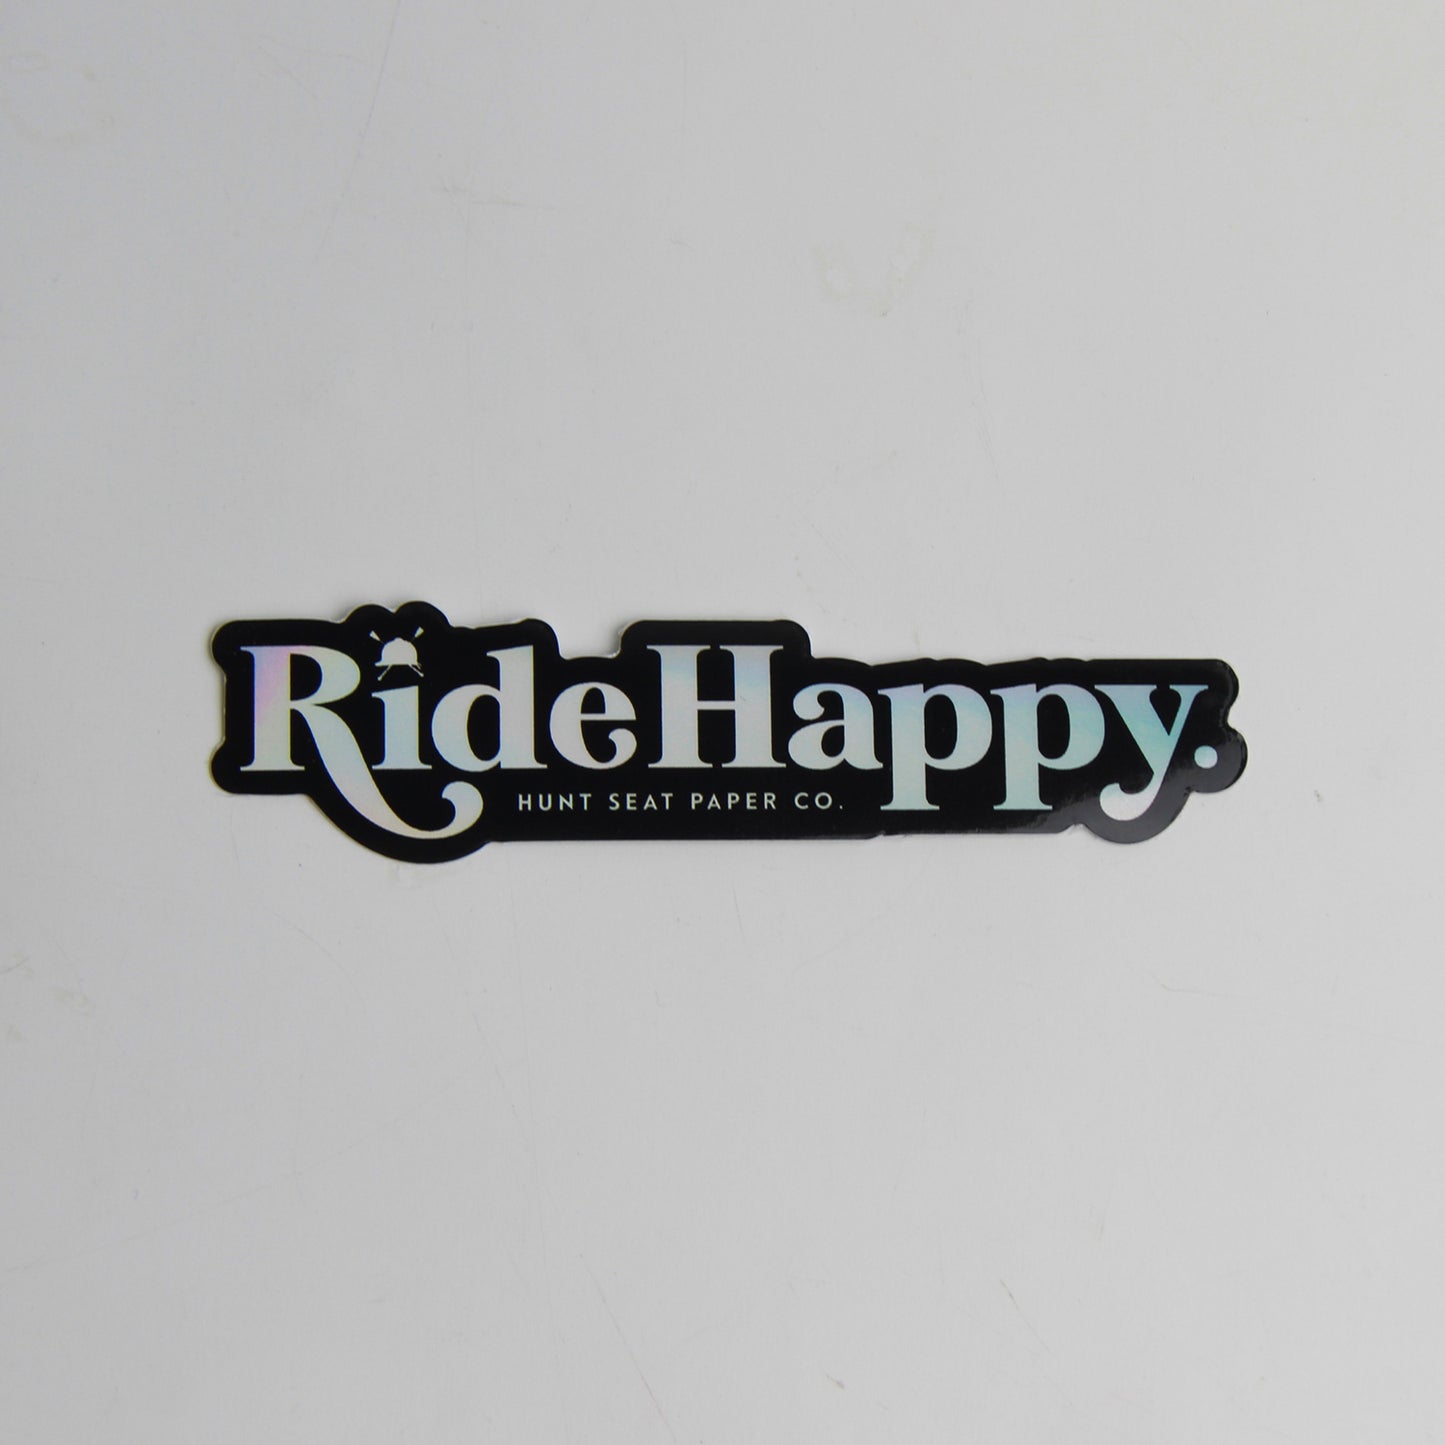 Stickers for horse show prizes and awards in bulk. Fun inexpensive equestrian horse show prize ideas.